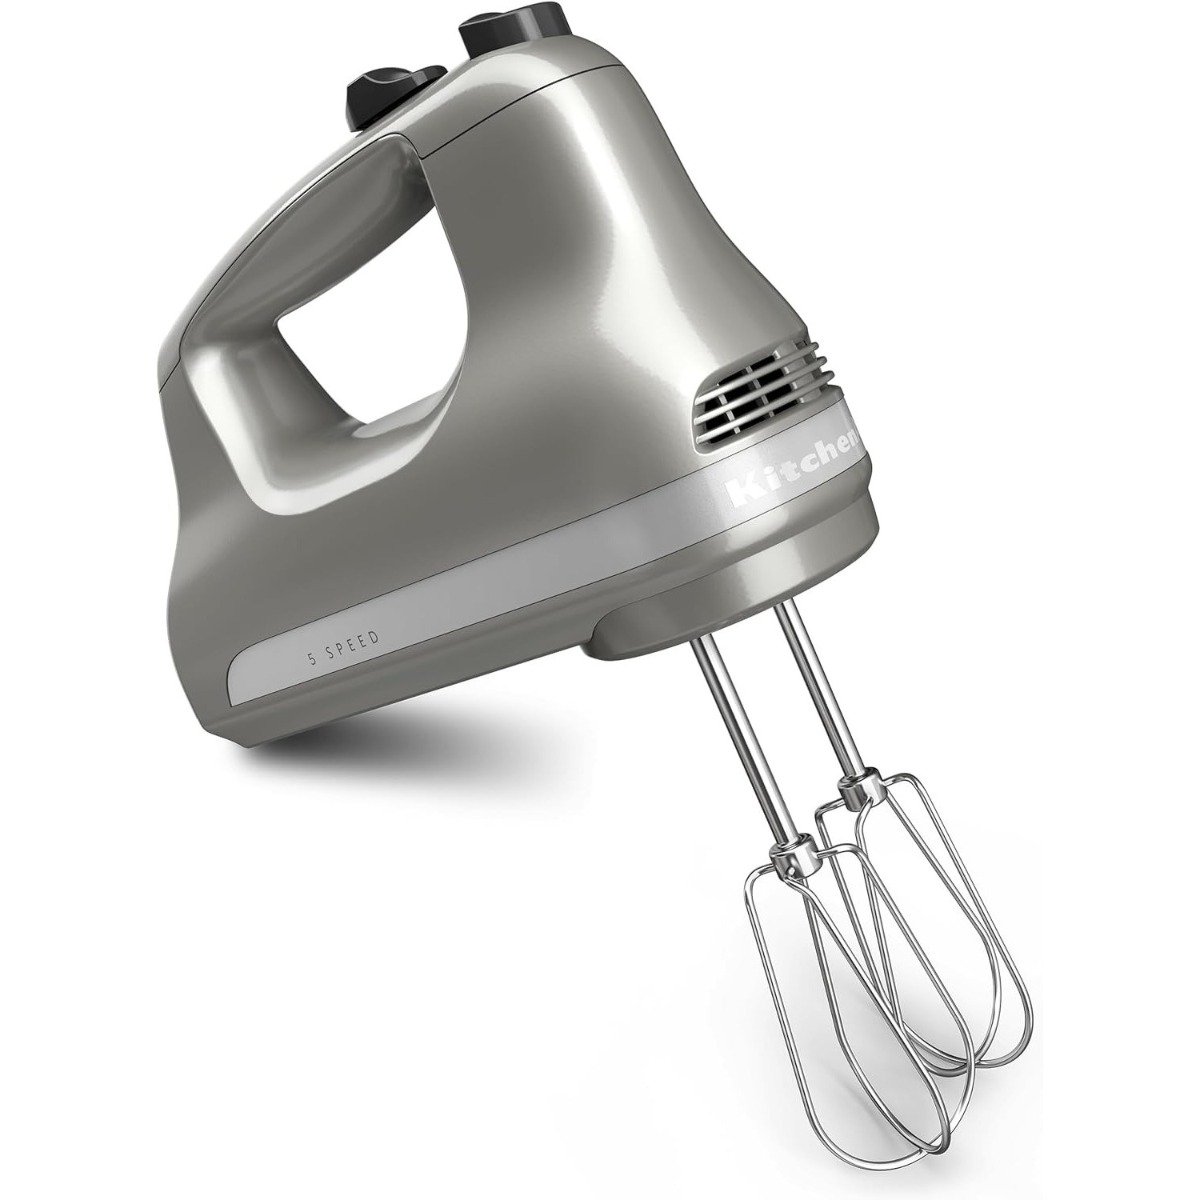 KitchenAid 5-Speed Ultra Power Hand Mixer | Contour Silver - image 1 of 4